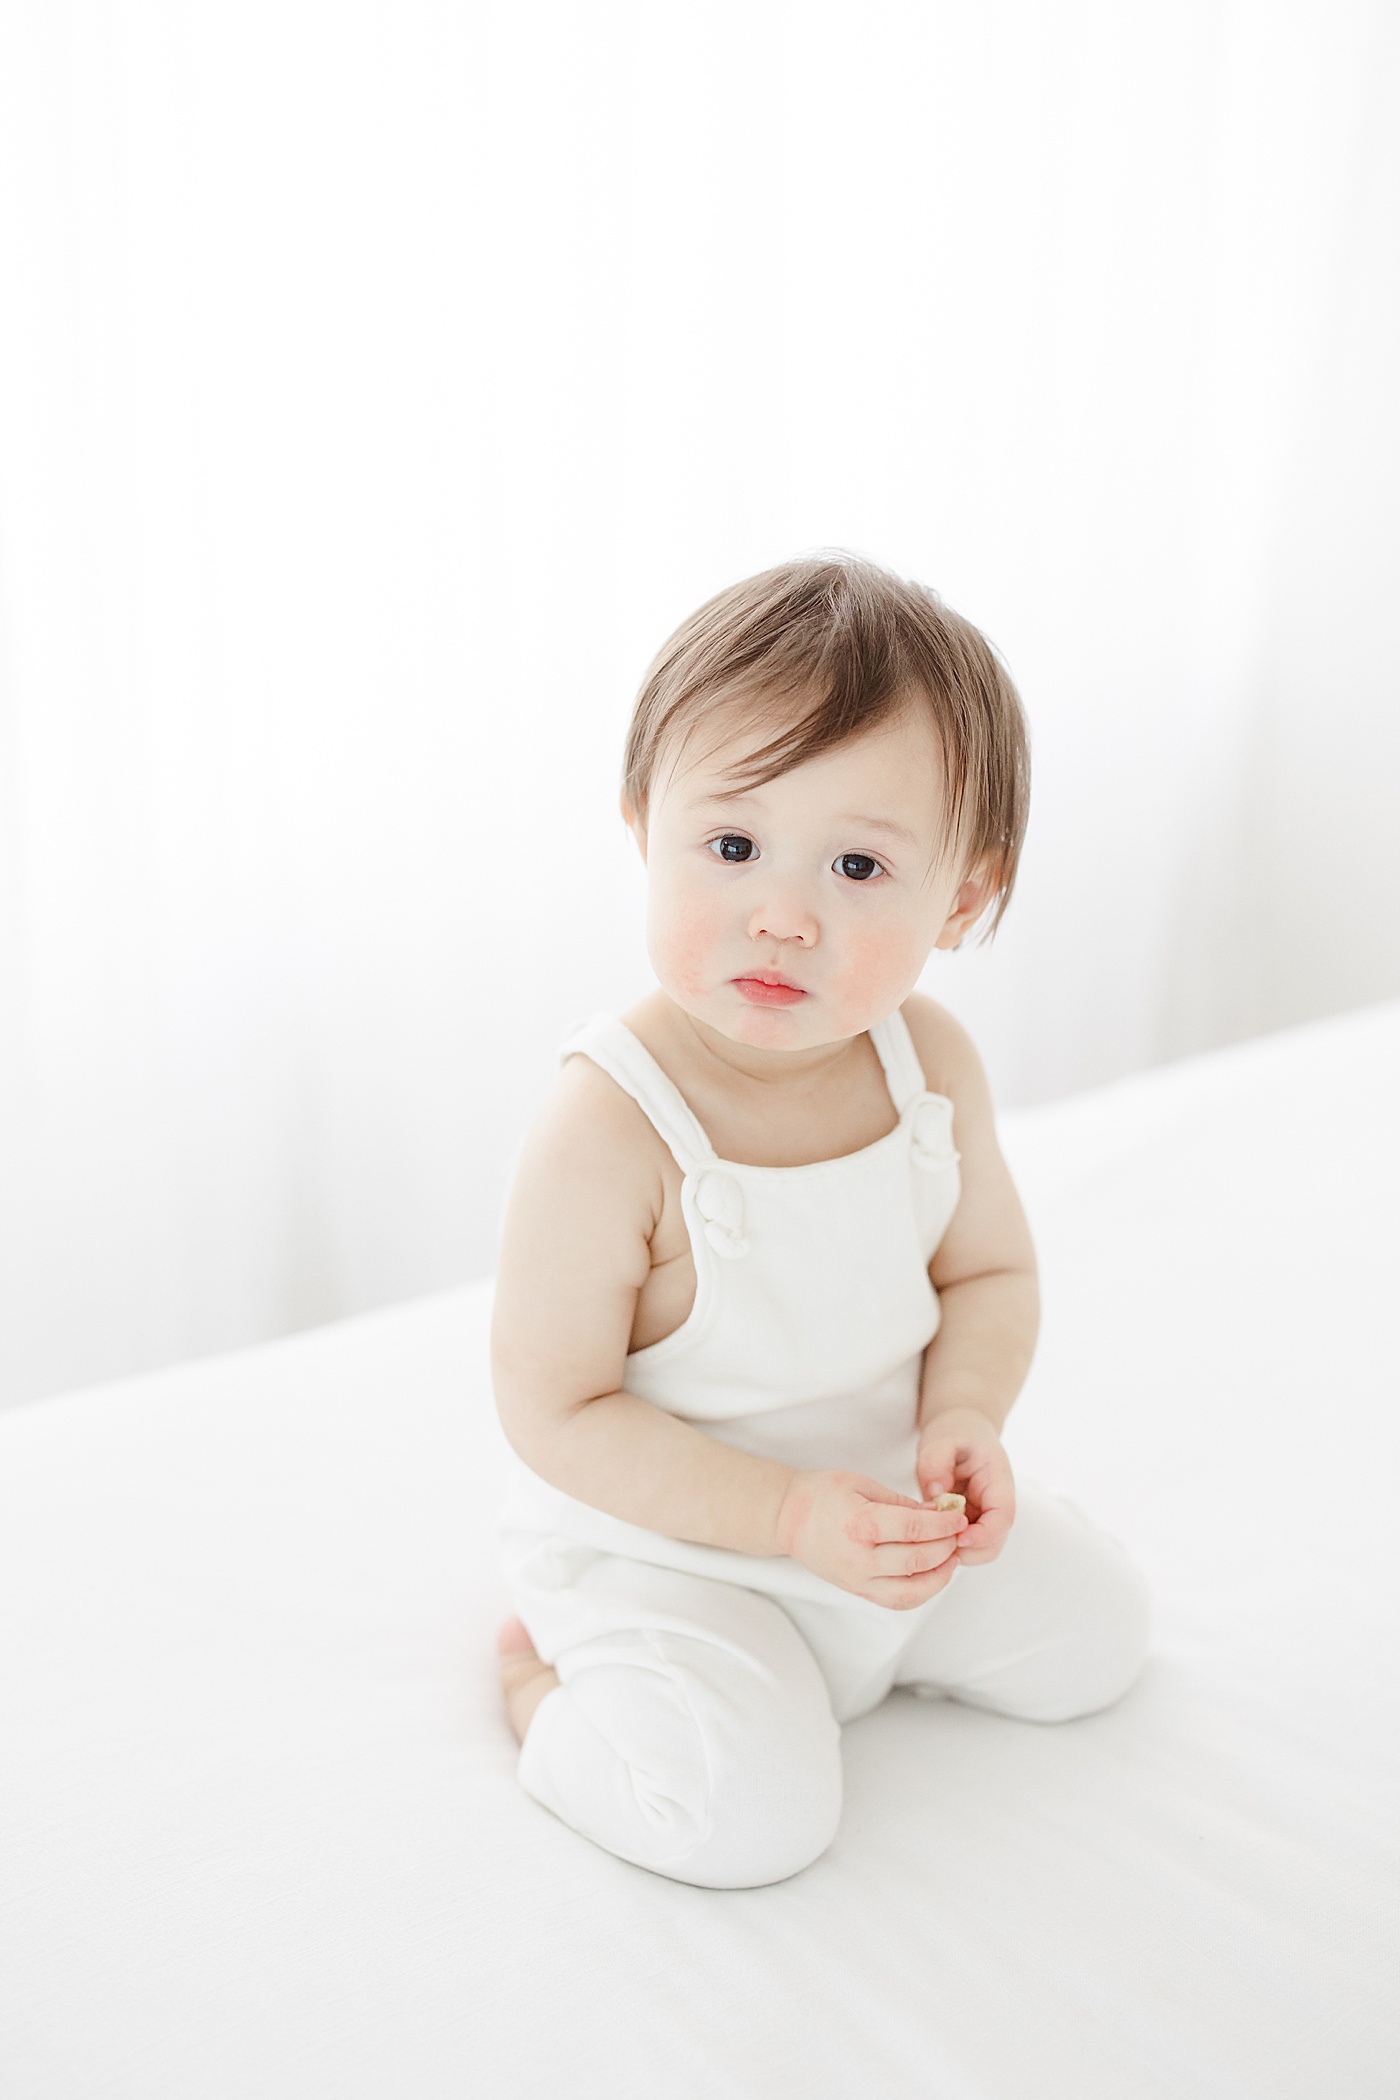 One year old photoshoot in studio in Westport, CT | Kristin Wood Photography